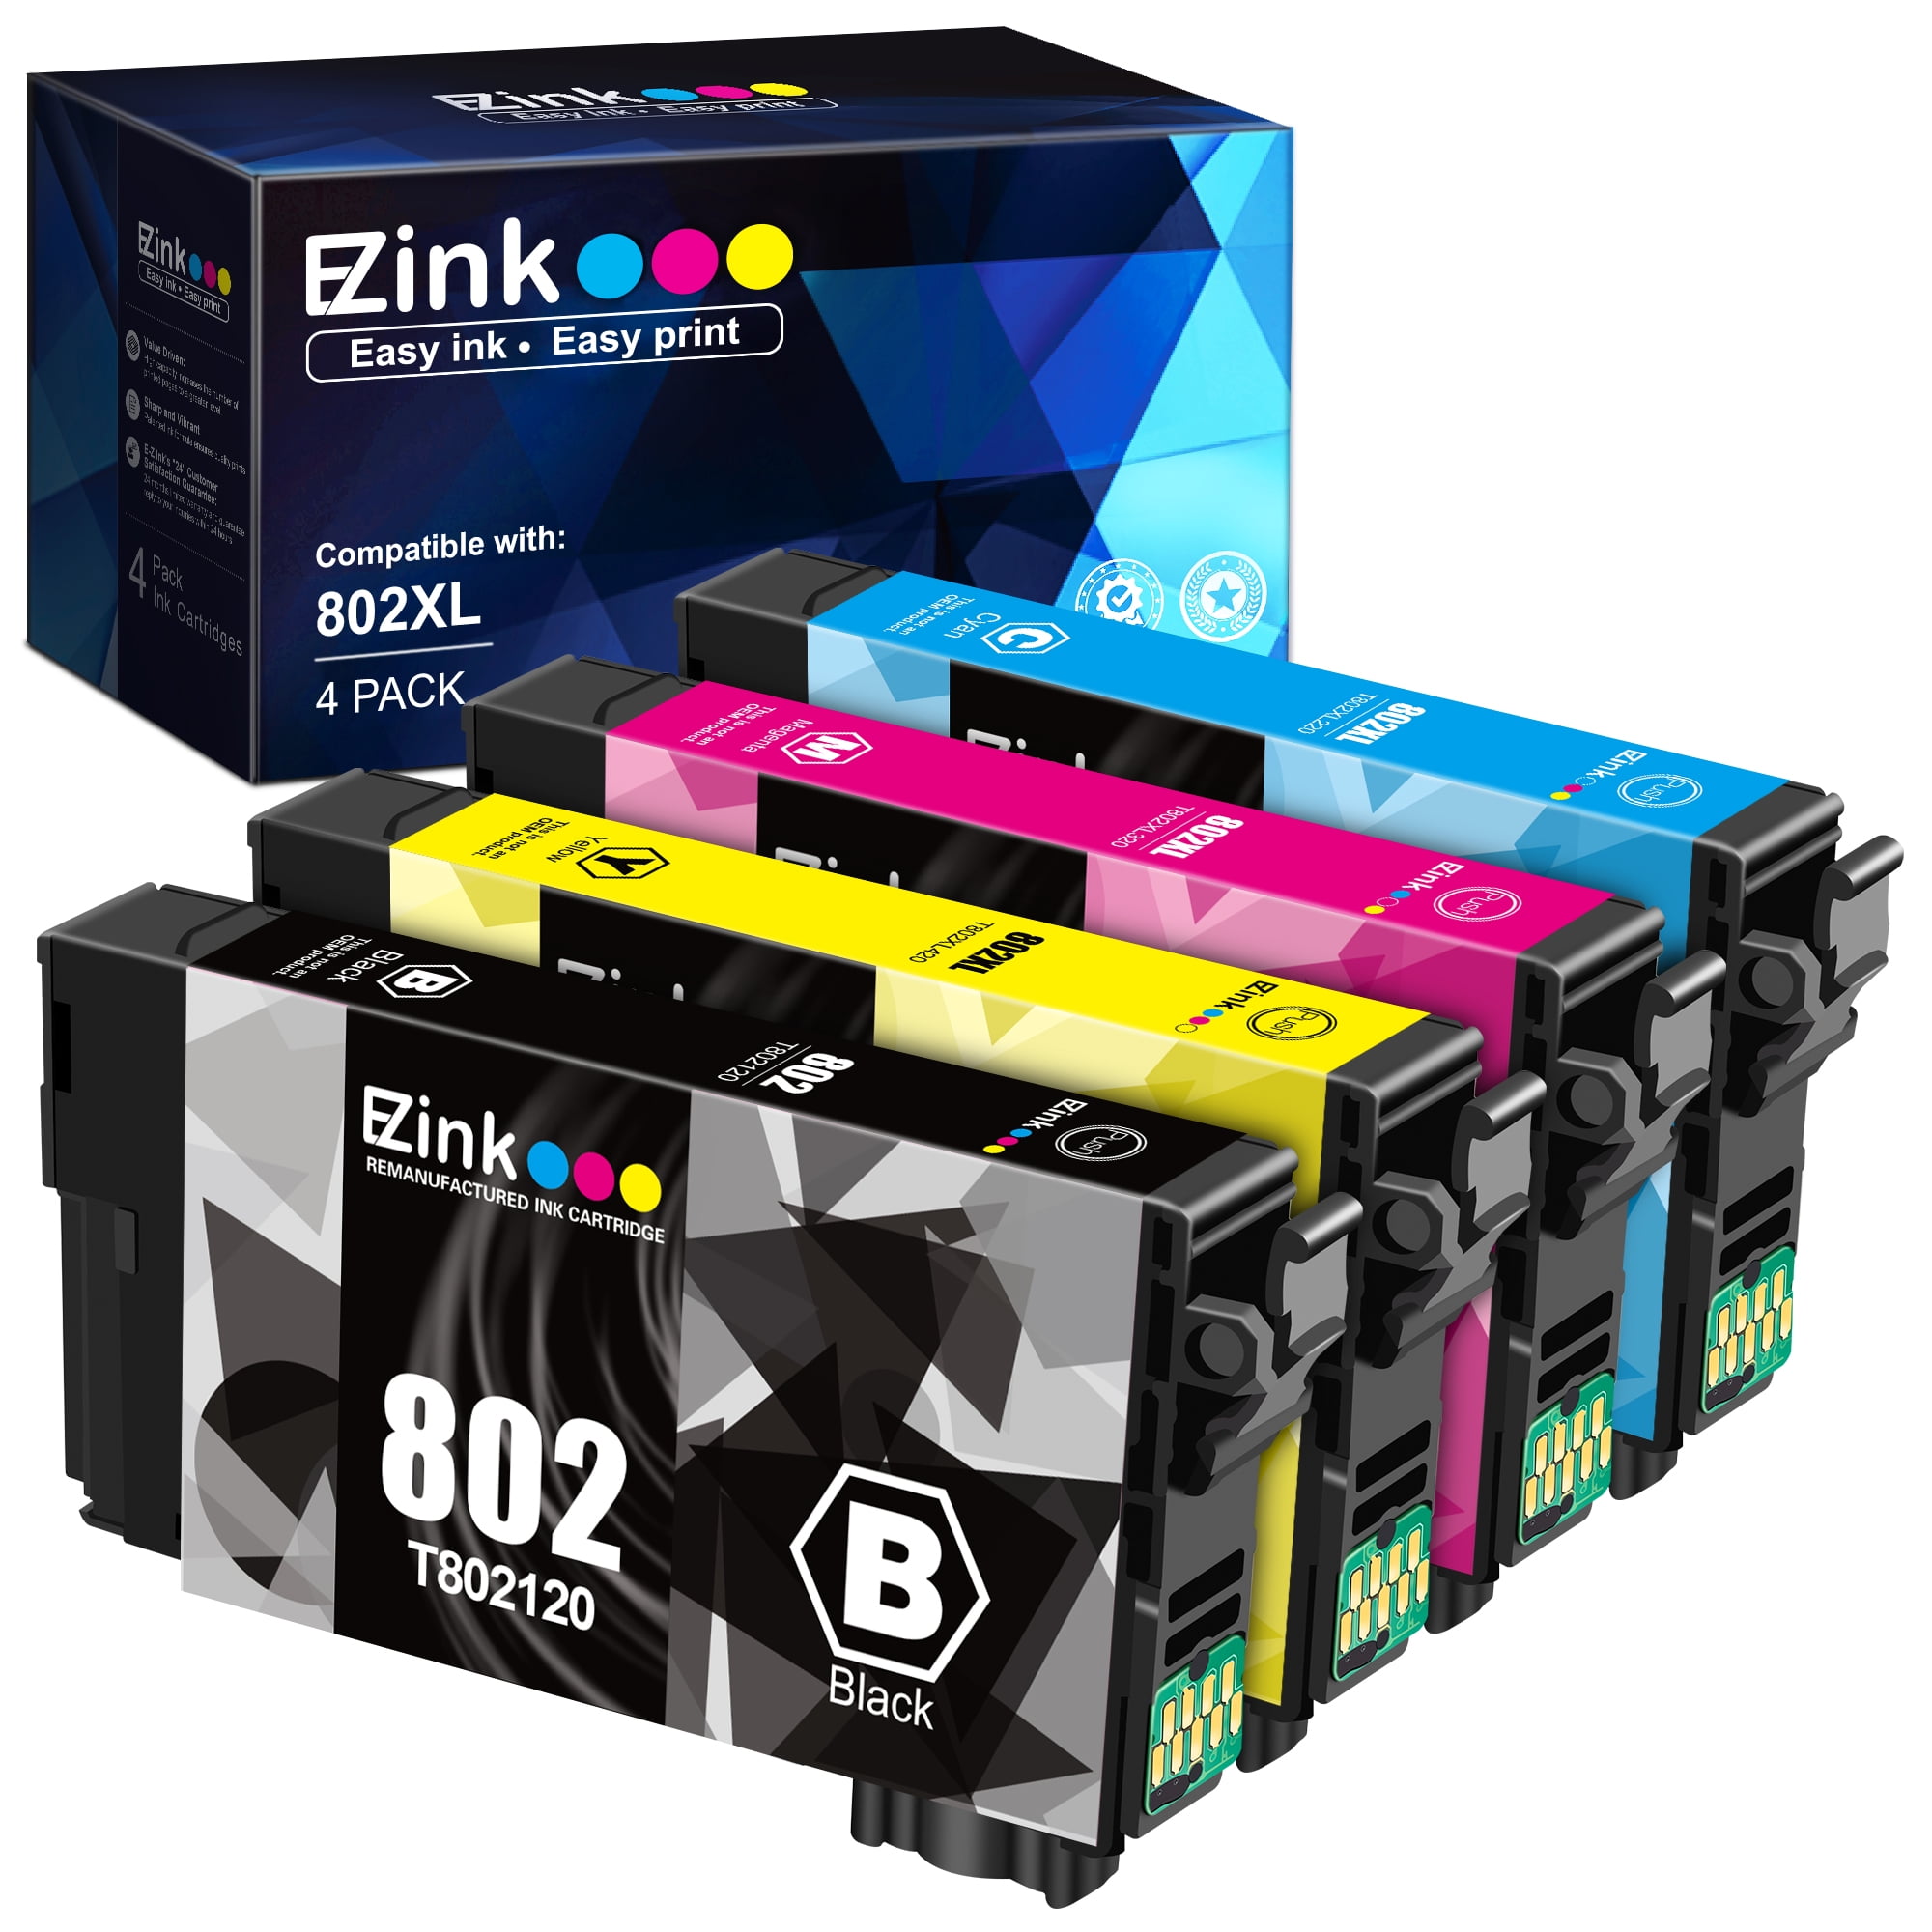 LEMERO Remanufactured Ink Cartridges Replacement for Epson 802XL 802 T802XL T802 to use with Workforce Pro WF-4740 WF-4730 WF-4734 WF-4720 EC-4020 EC-4030 Printer Black, 2-Pack 